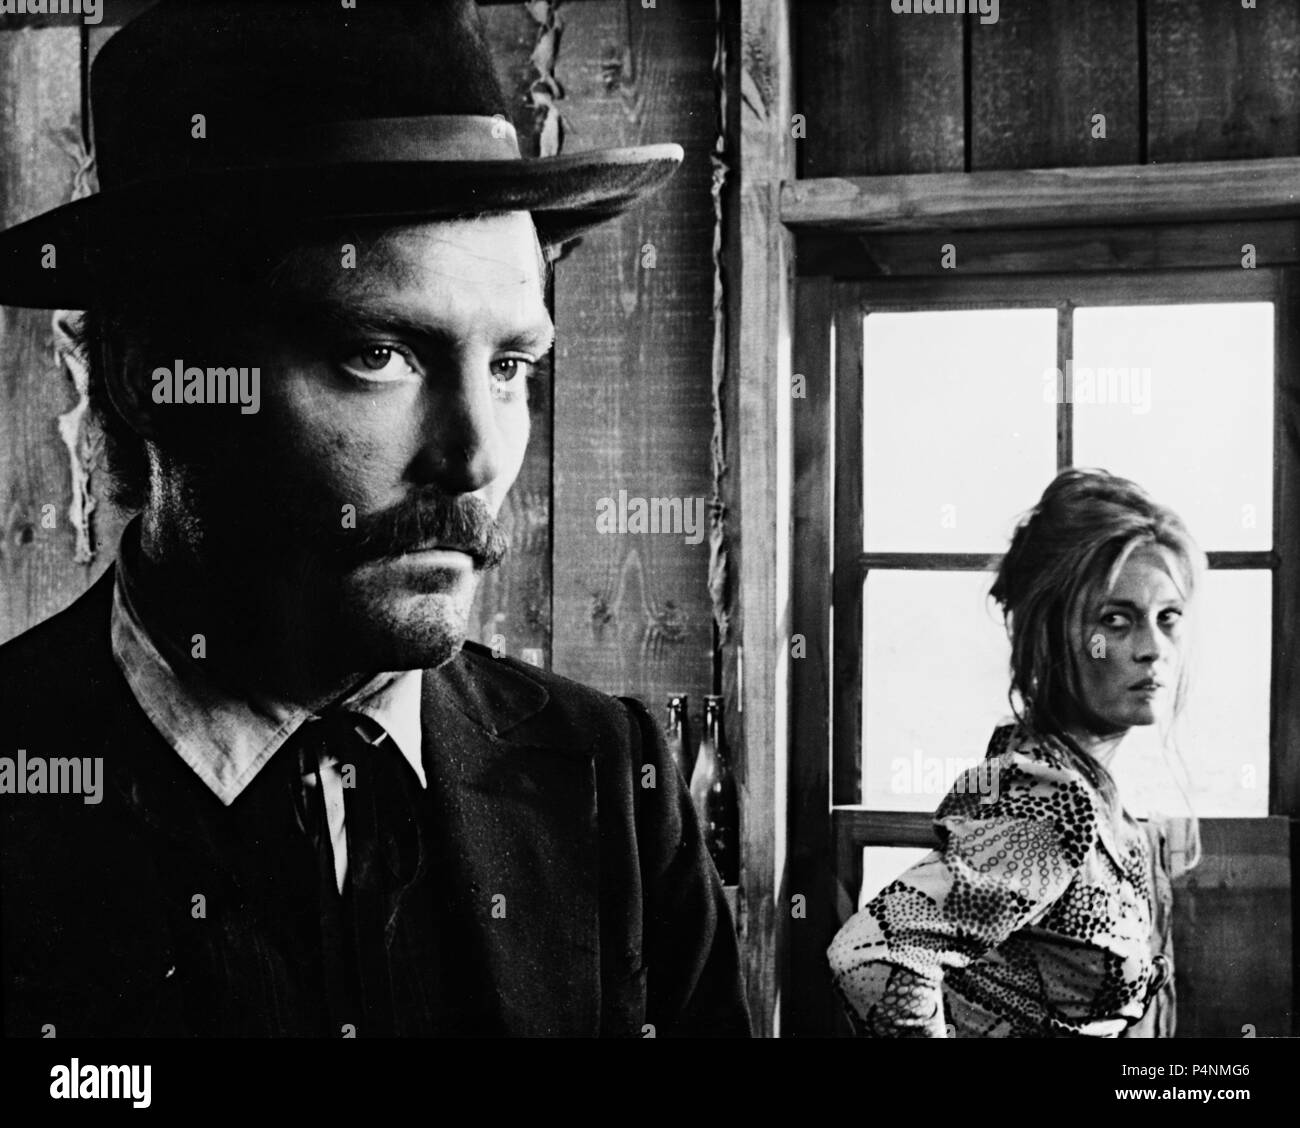 Original Film Title: AN.  English Title: AN.  Film Director: FRANK PERRY.  Year: 1971.  Stars: FAYE DUNAWAY; STACY KEACH. Credit: FP FILMS / Album Stock Photo